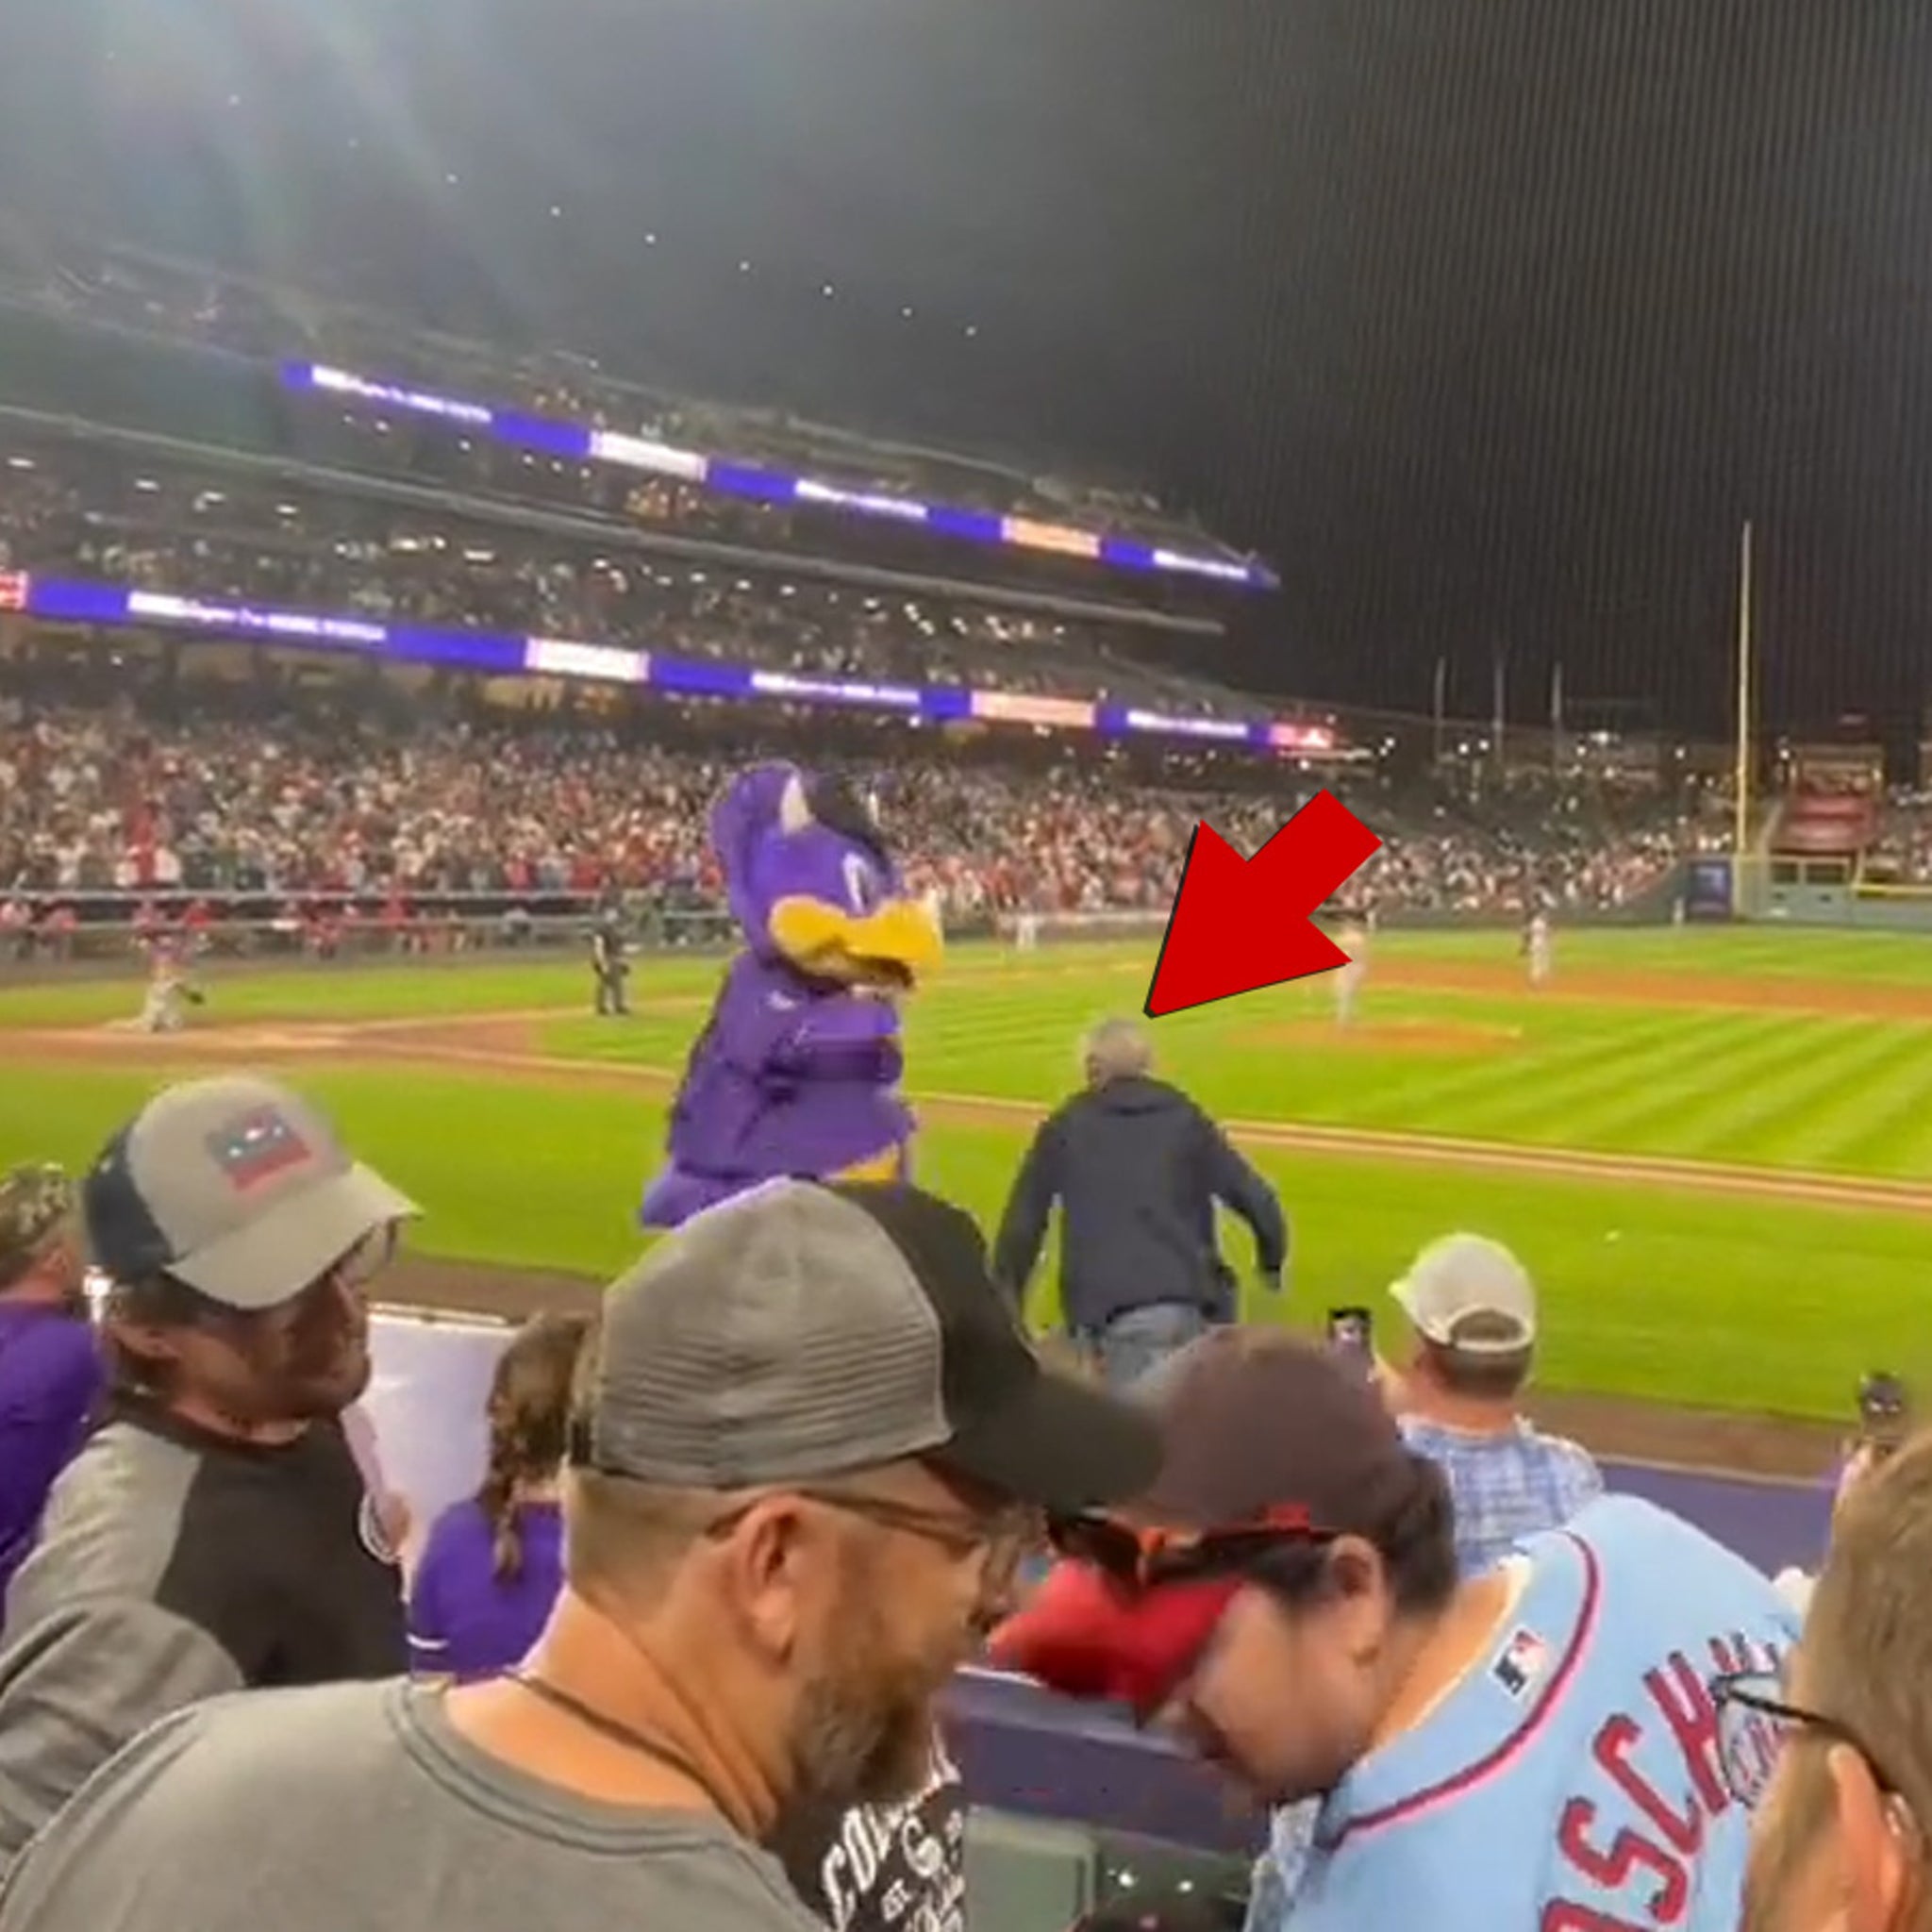 Denver police searching for fan who tackled mascot during Rockies game